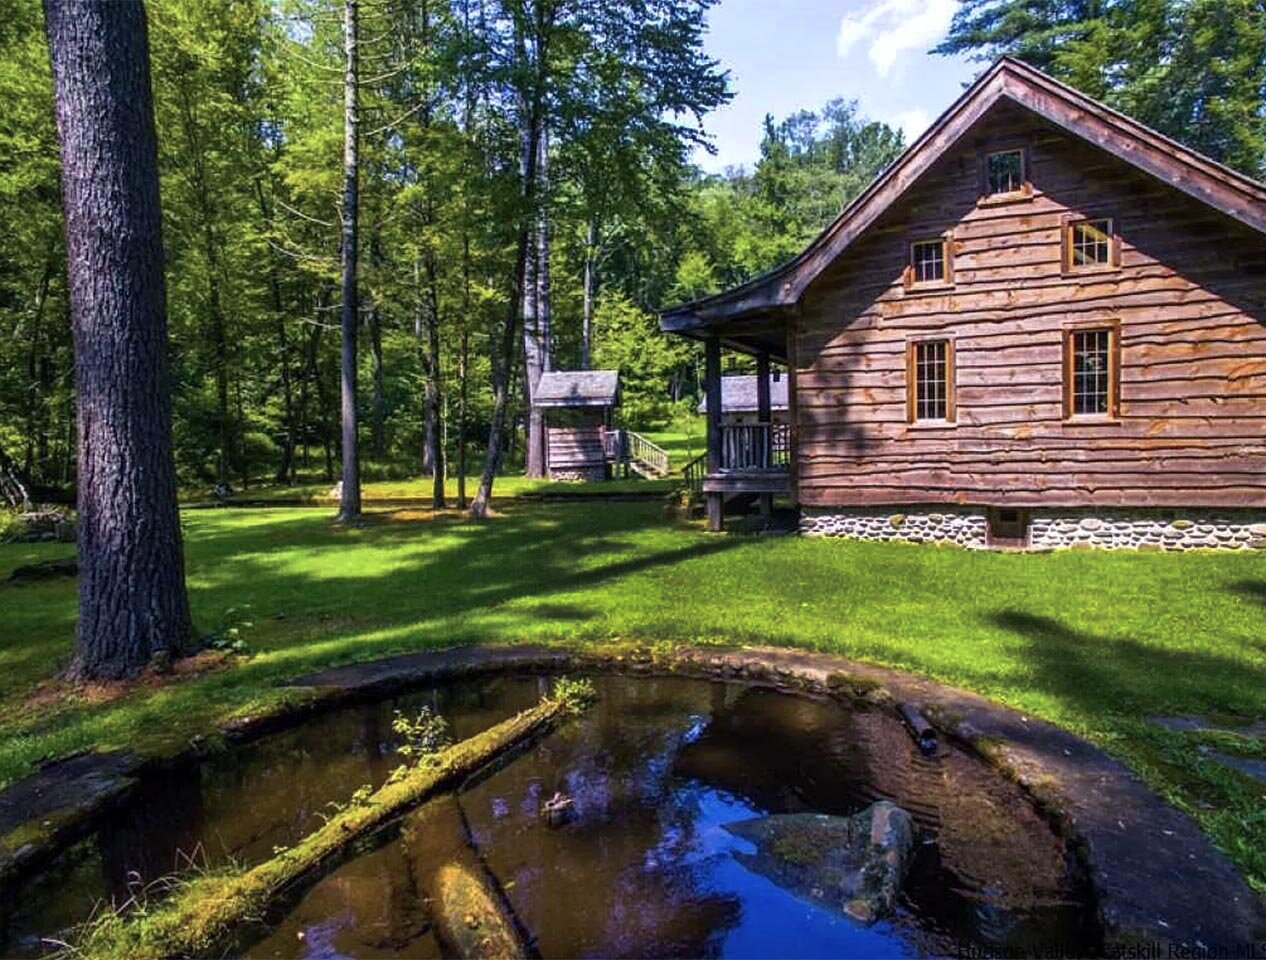 A rustic wooden historic cabin with a stone foundation at the Jenny Brook River School, with a pond in the foreground.